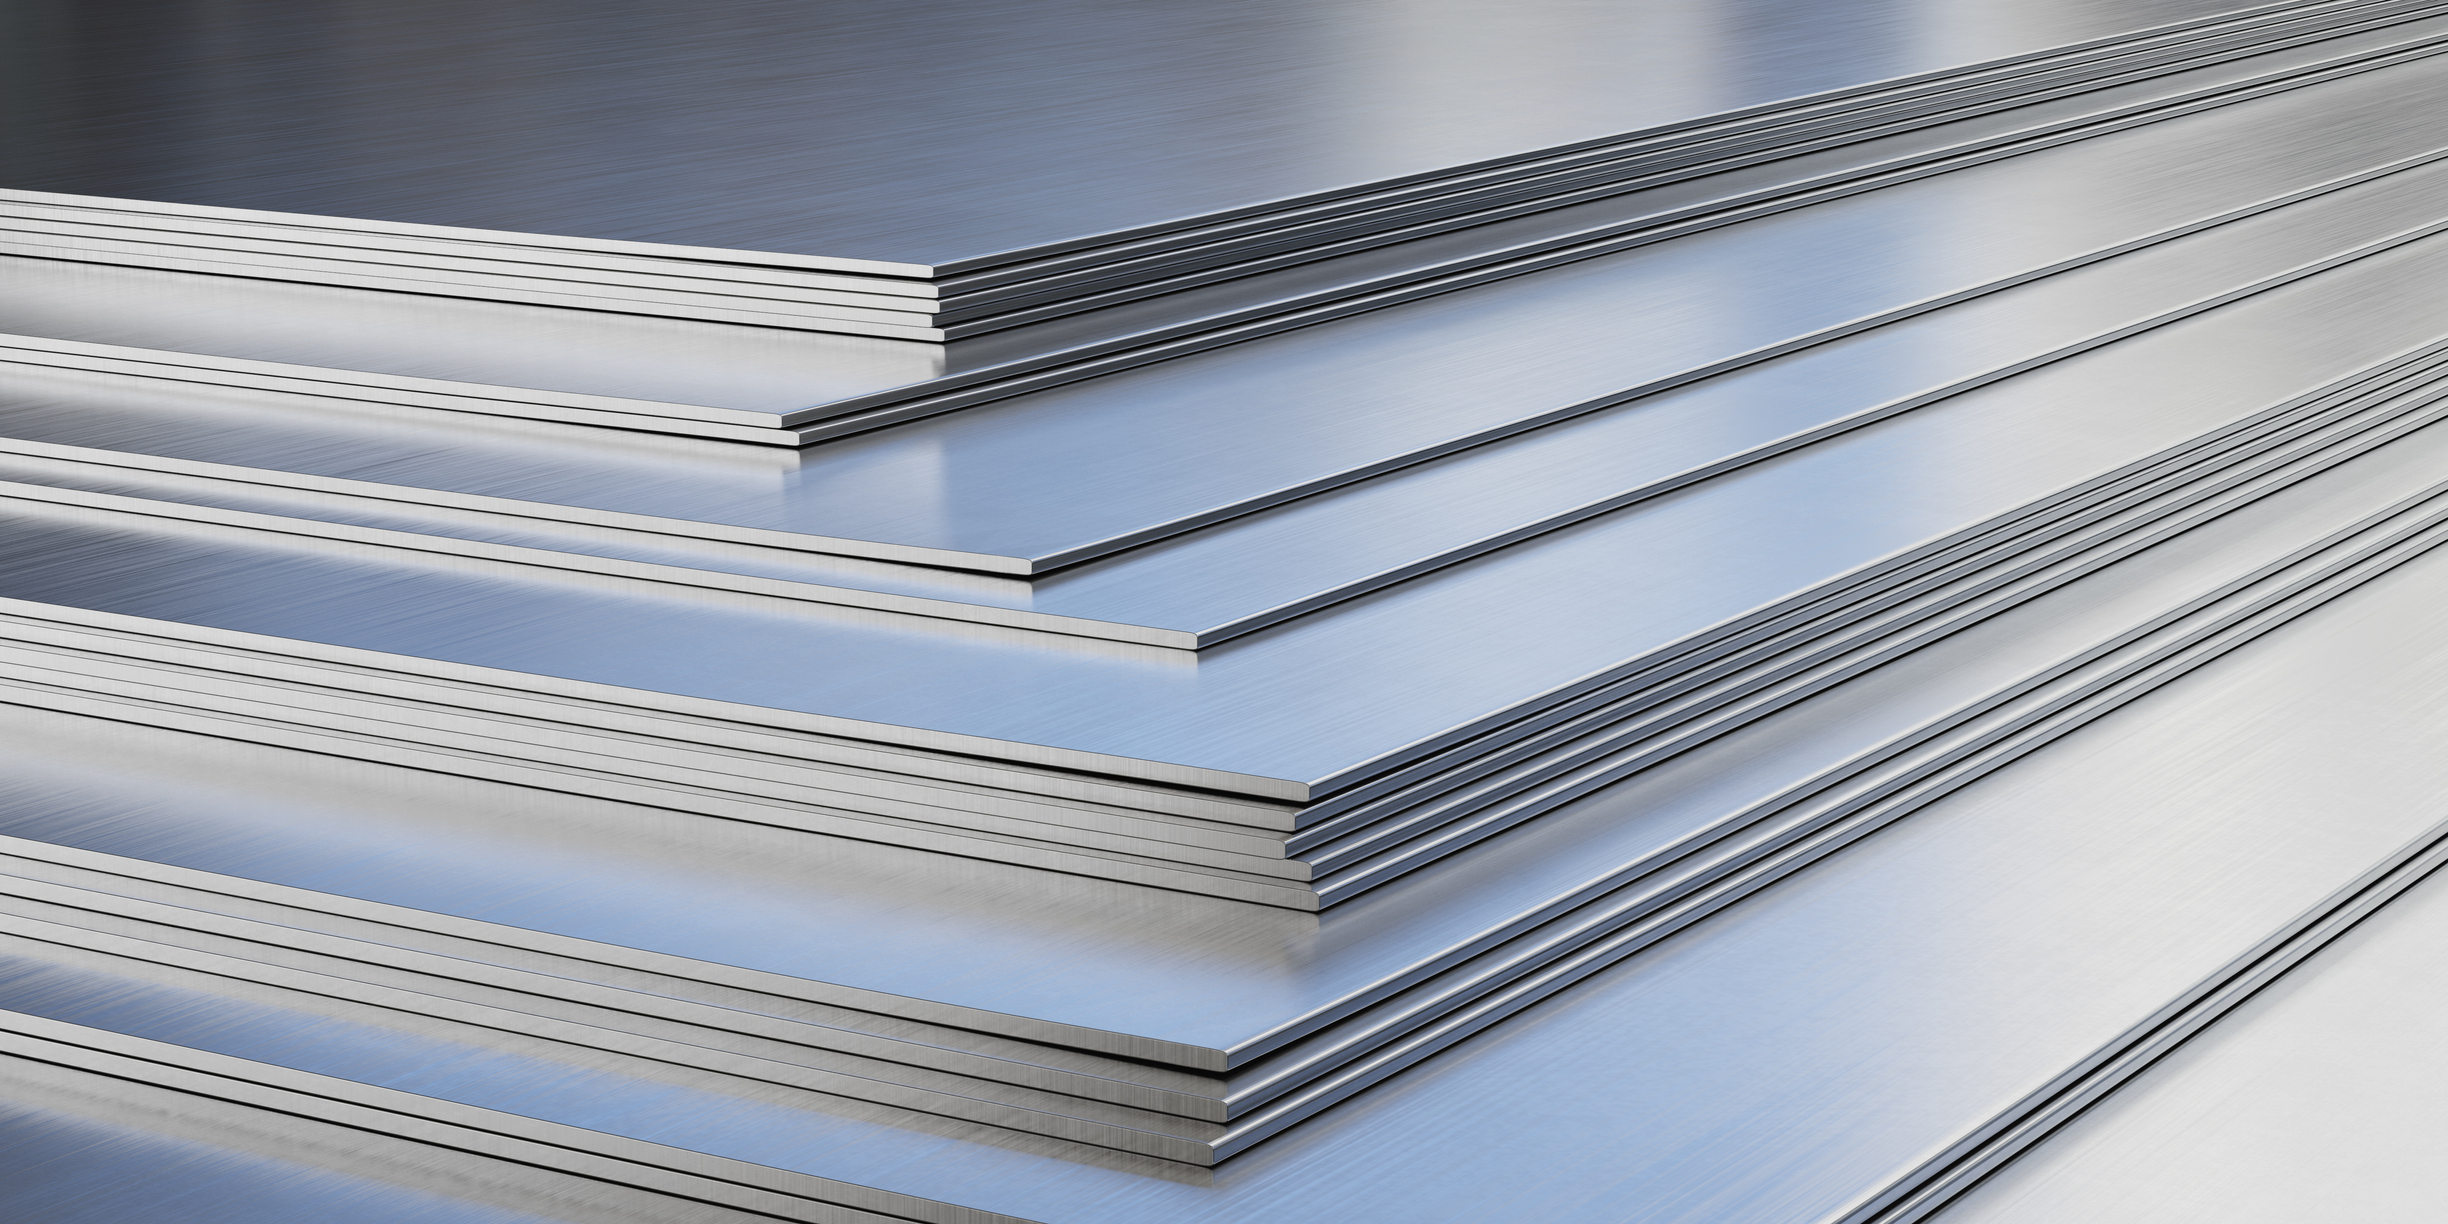 Stainless Steel Sheet Stock - 0.025 » Future Metals 1